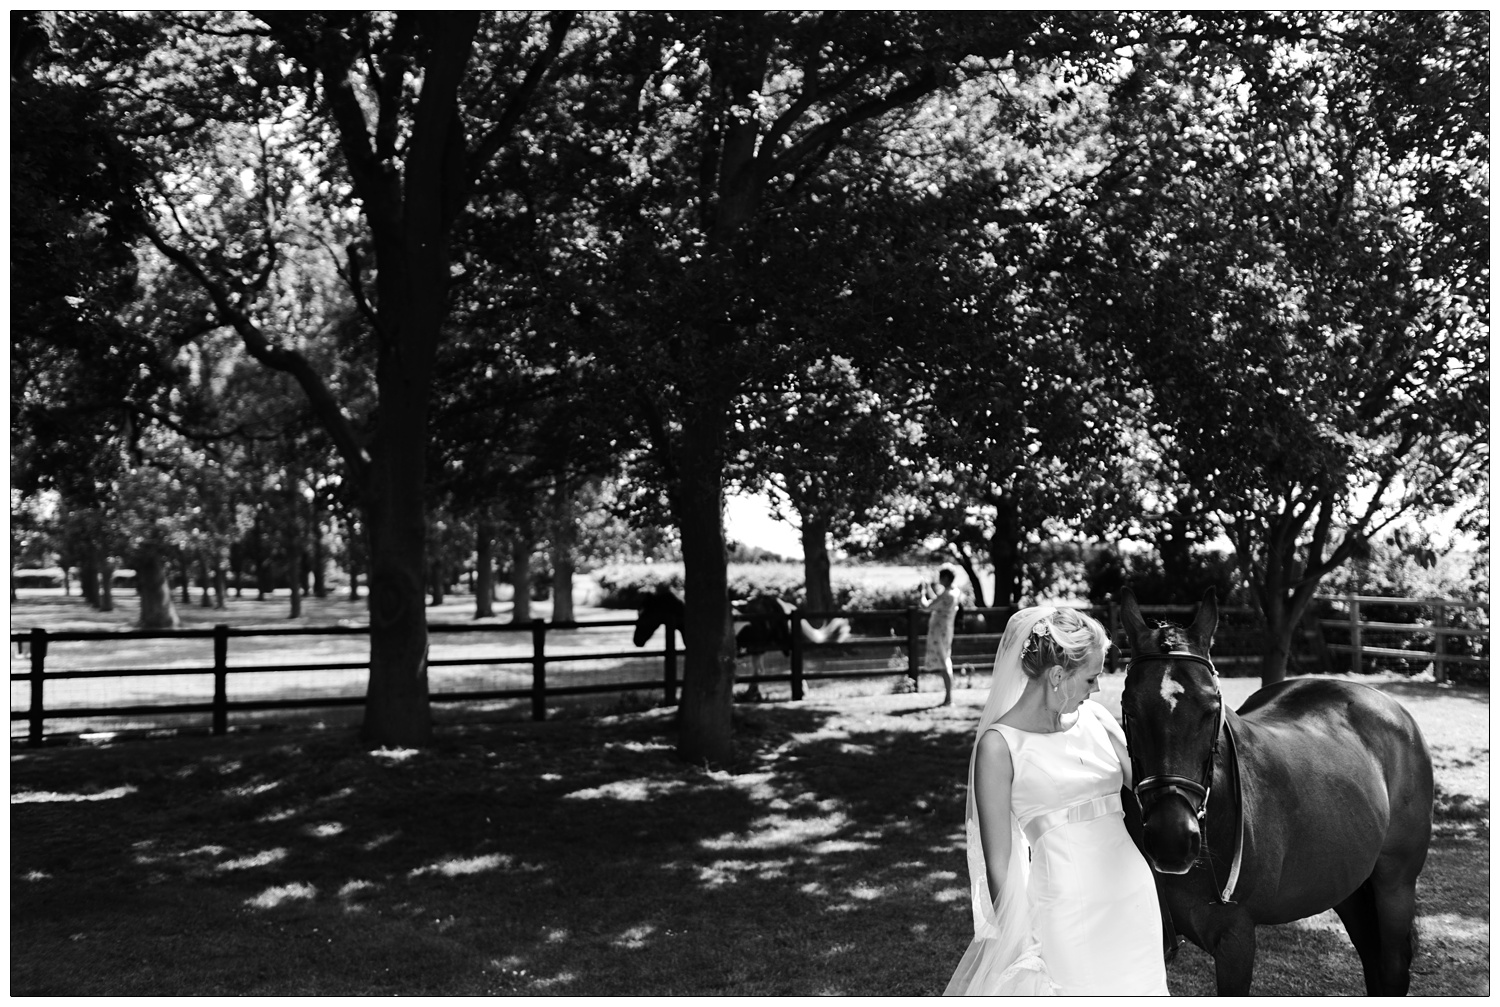 A woman in a wedding dress with her horse. There are trees behind them and dappled light.